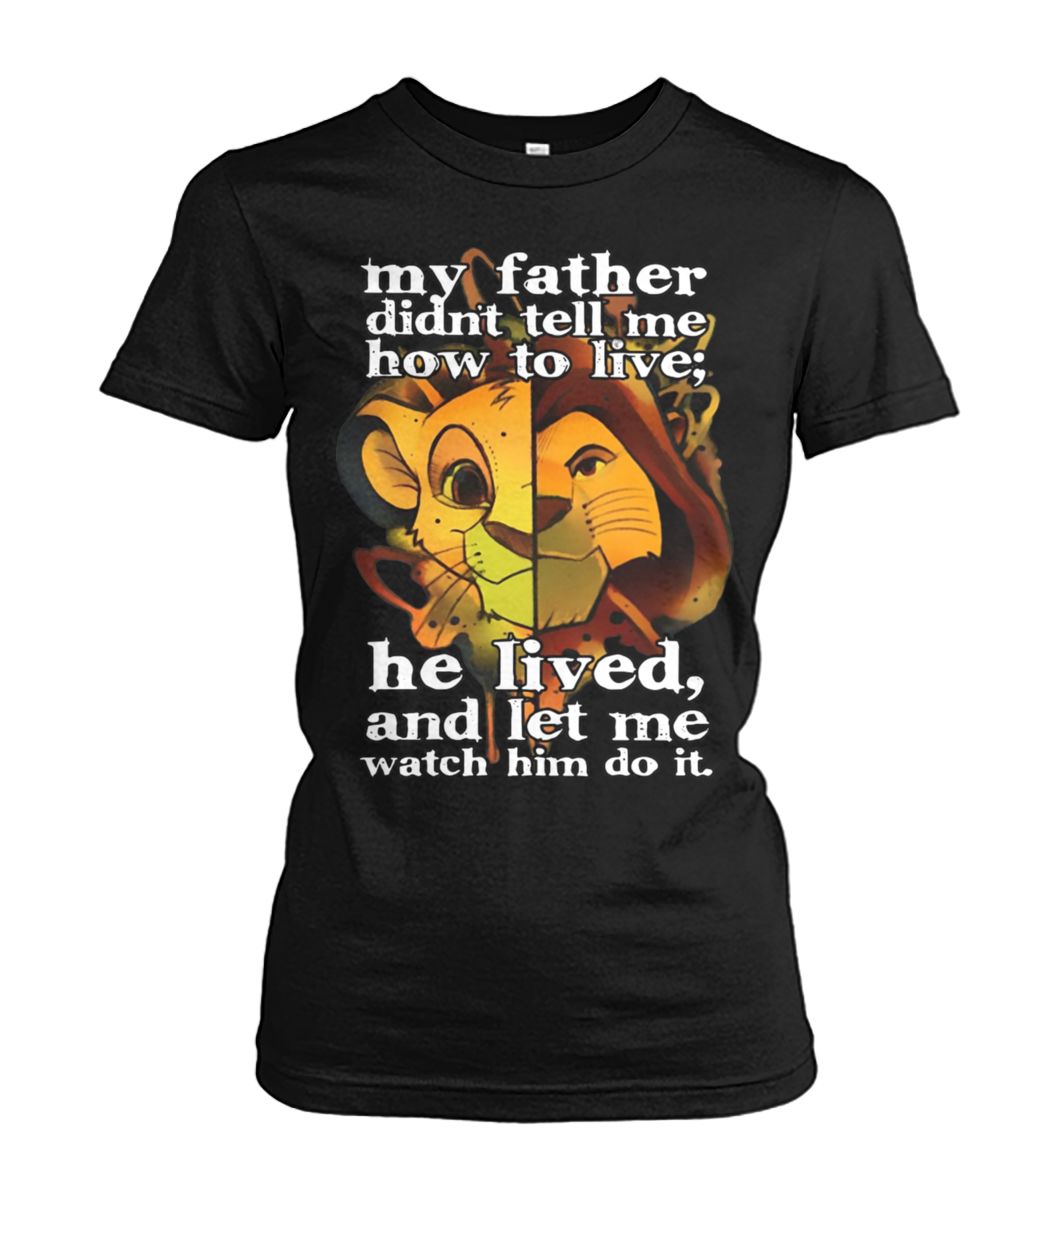 My father didn’t tell me how to live he lived and let me watch him do it the lion king women's crew tee